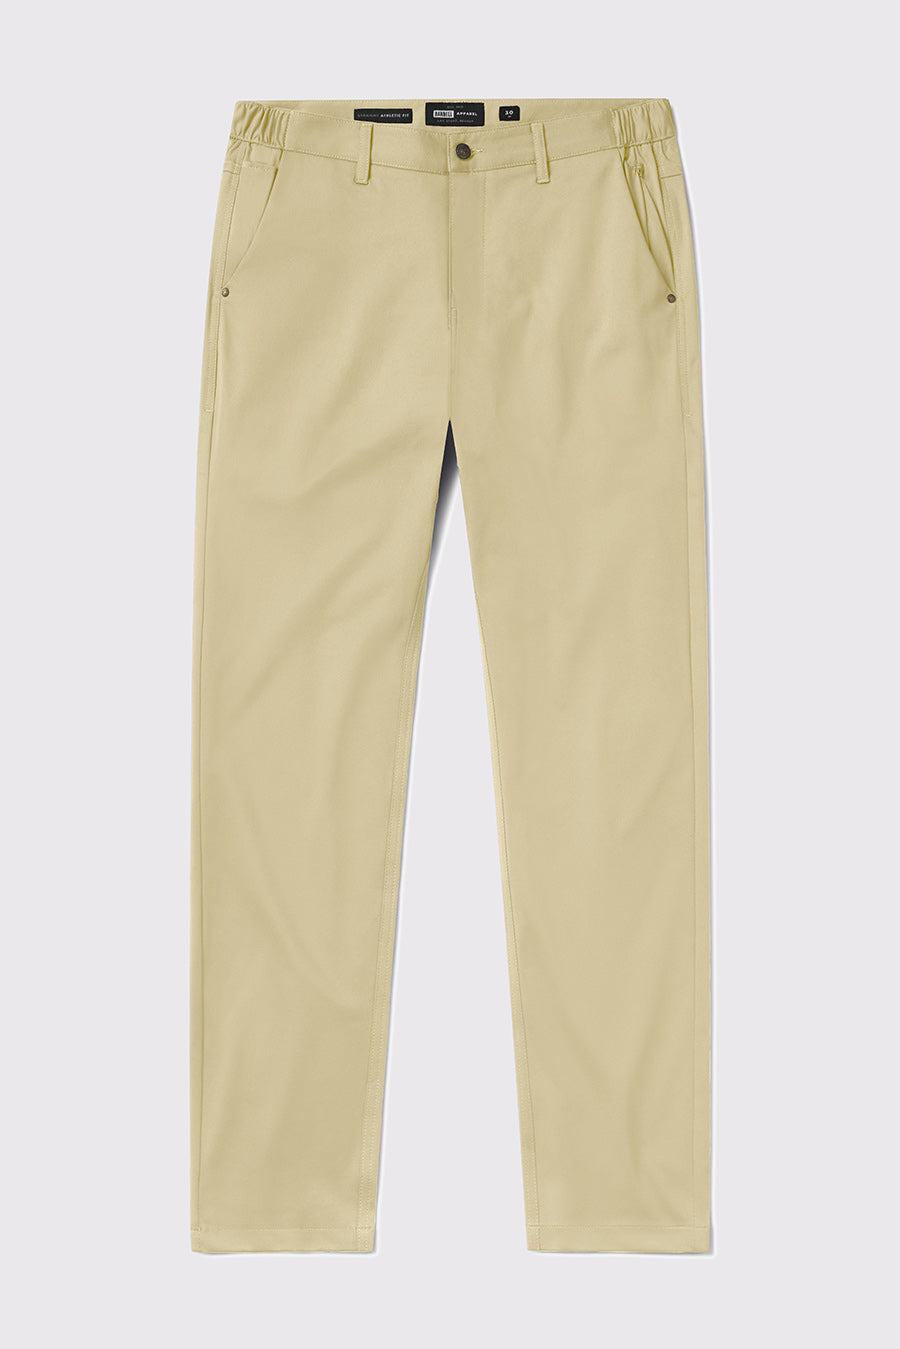 Anything Dress Pant Straight - Khaki - photo from front flat lay #color_khaki